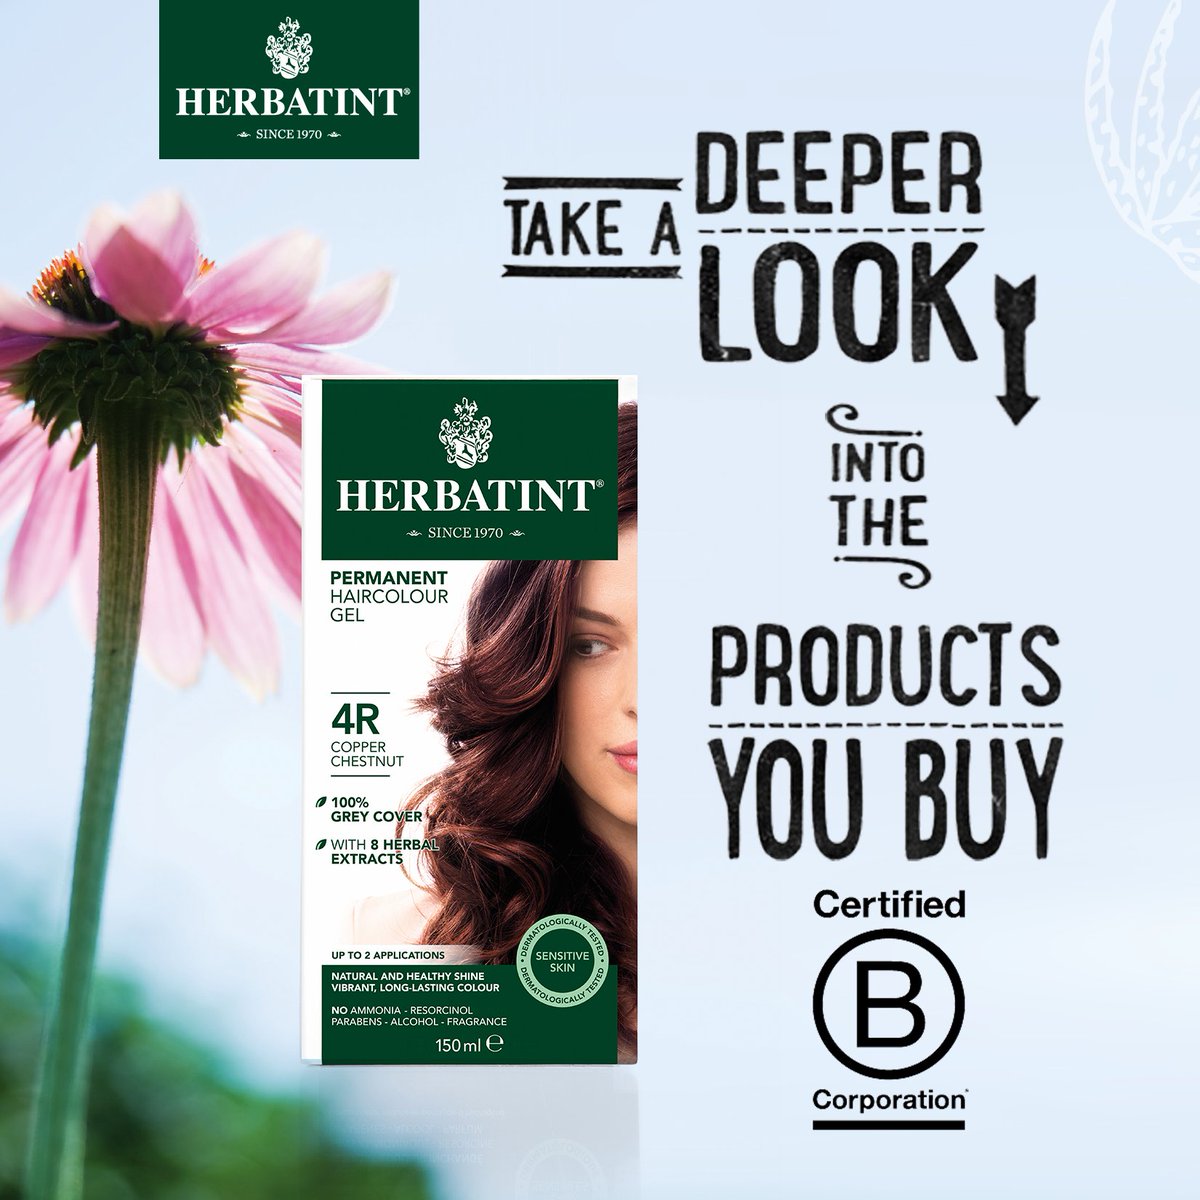 #BCorp #BCorpMonth #reinventingbusiness #betterforbusiness #herbatintusa #madeinitaly #bioforceusa #natural #hairdye #haircolor